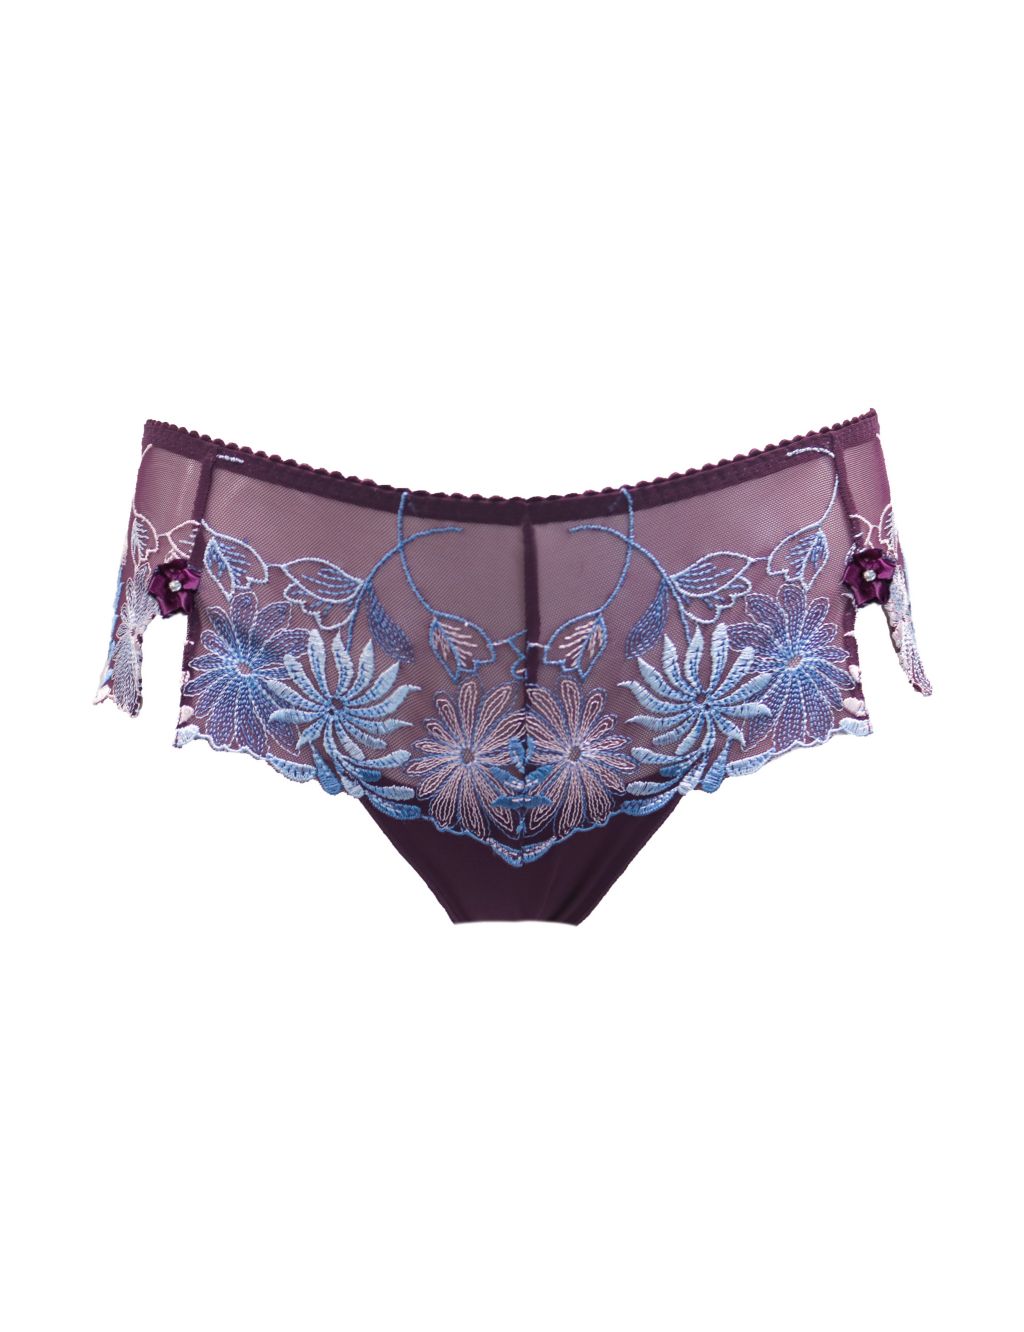 St Tropez French Knickers image 2